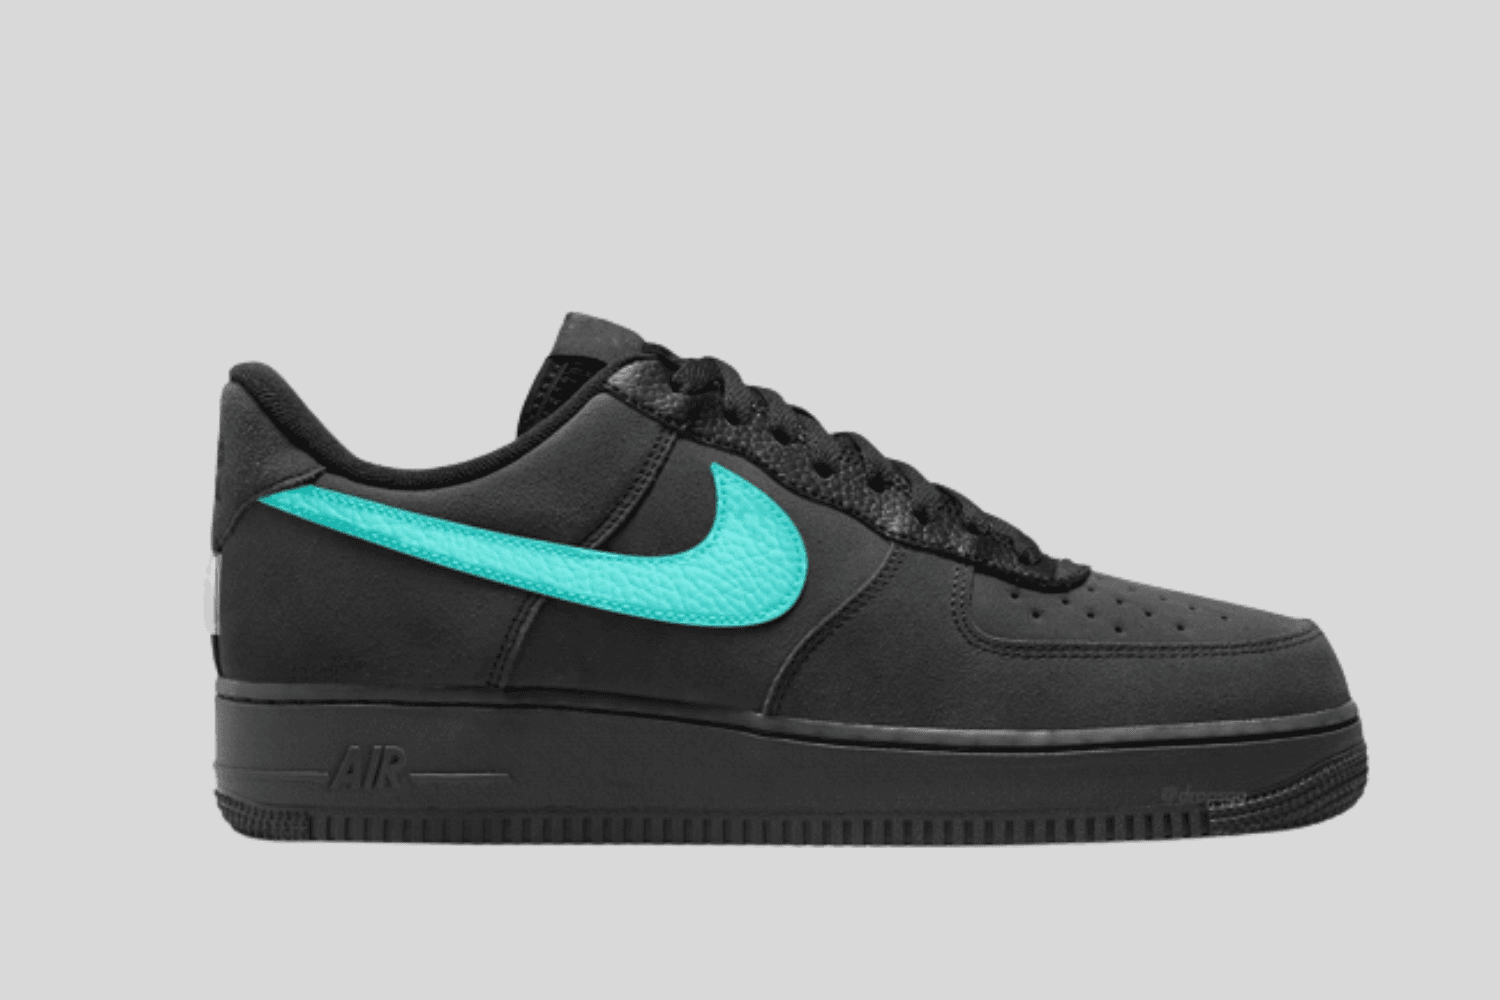 First images of the Tiffany &amp; Co. x Nike Air Force 1 Low